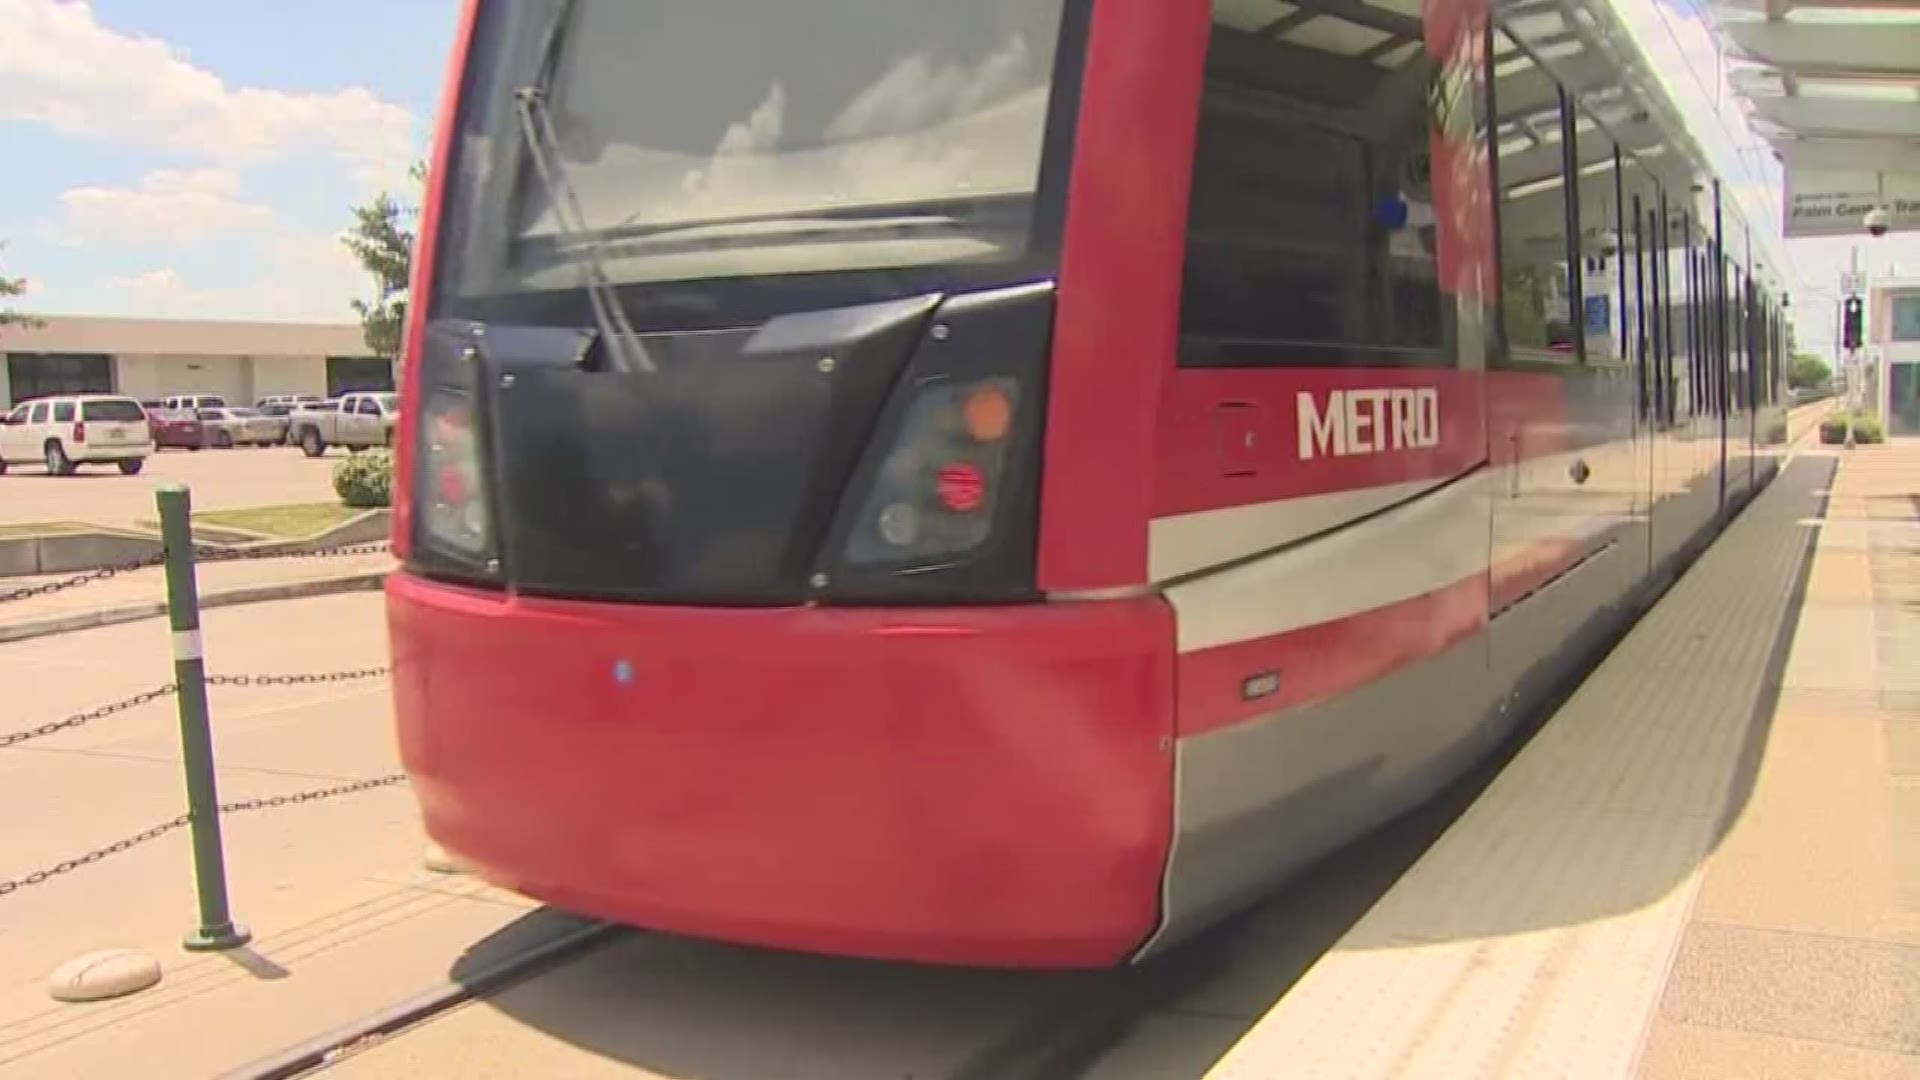 The Metro Houston board approved on Tuesday a $3.5 billion bond measure that will be on the November ballot.